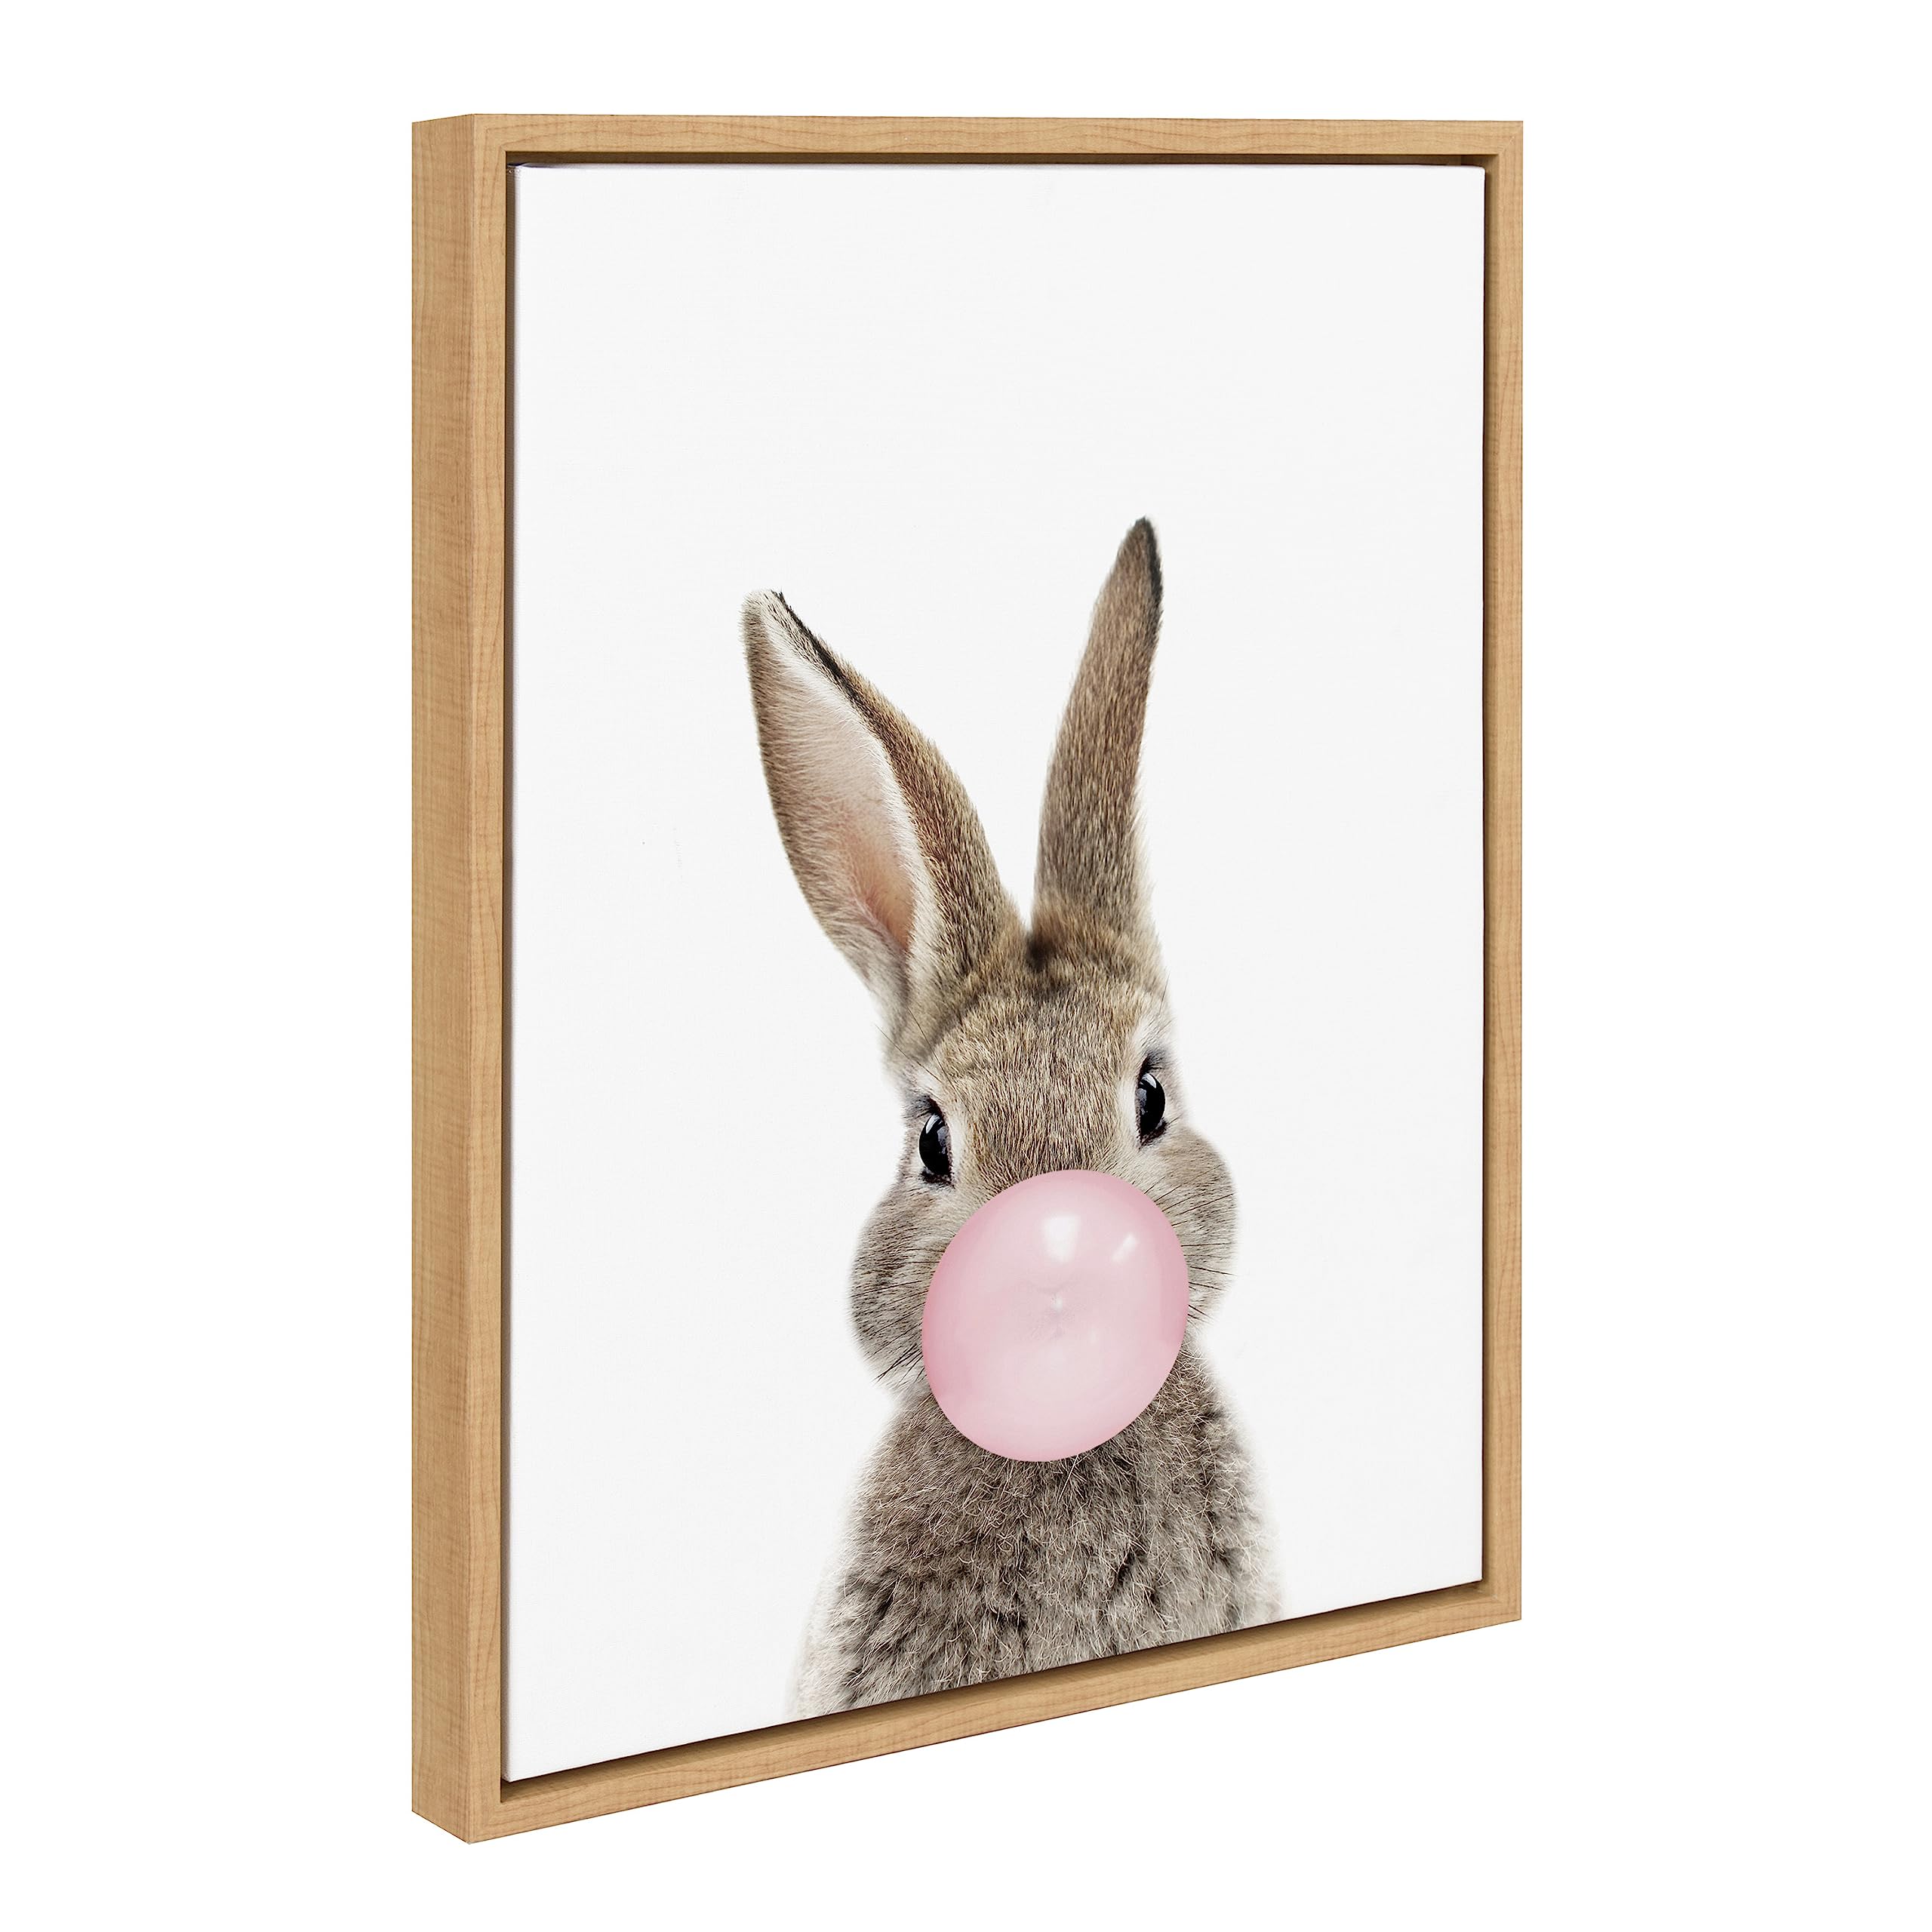 Kate and Laurel Sylvie Bubble Gum Bunny Framed Canvas Wall Art by Amy Peterson Art Studio, 18x24 Natural, Cute Whimsical Animal Art for Wall